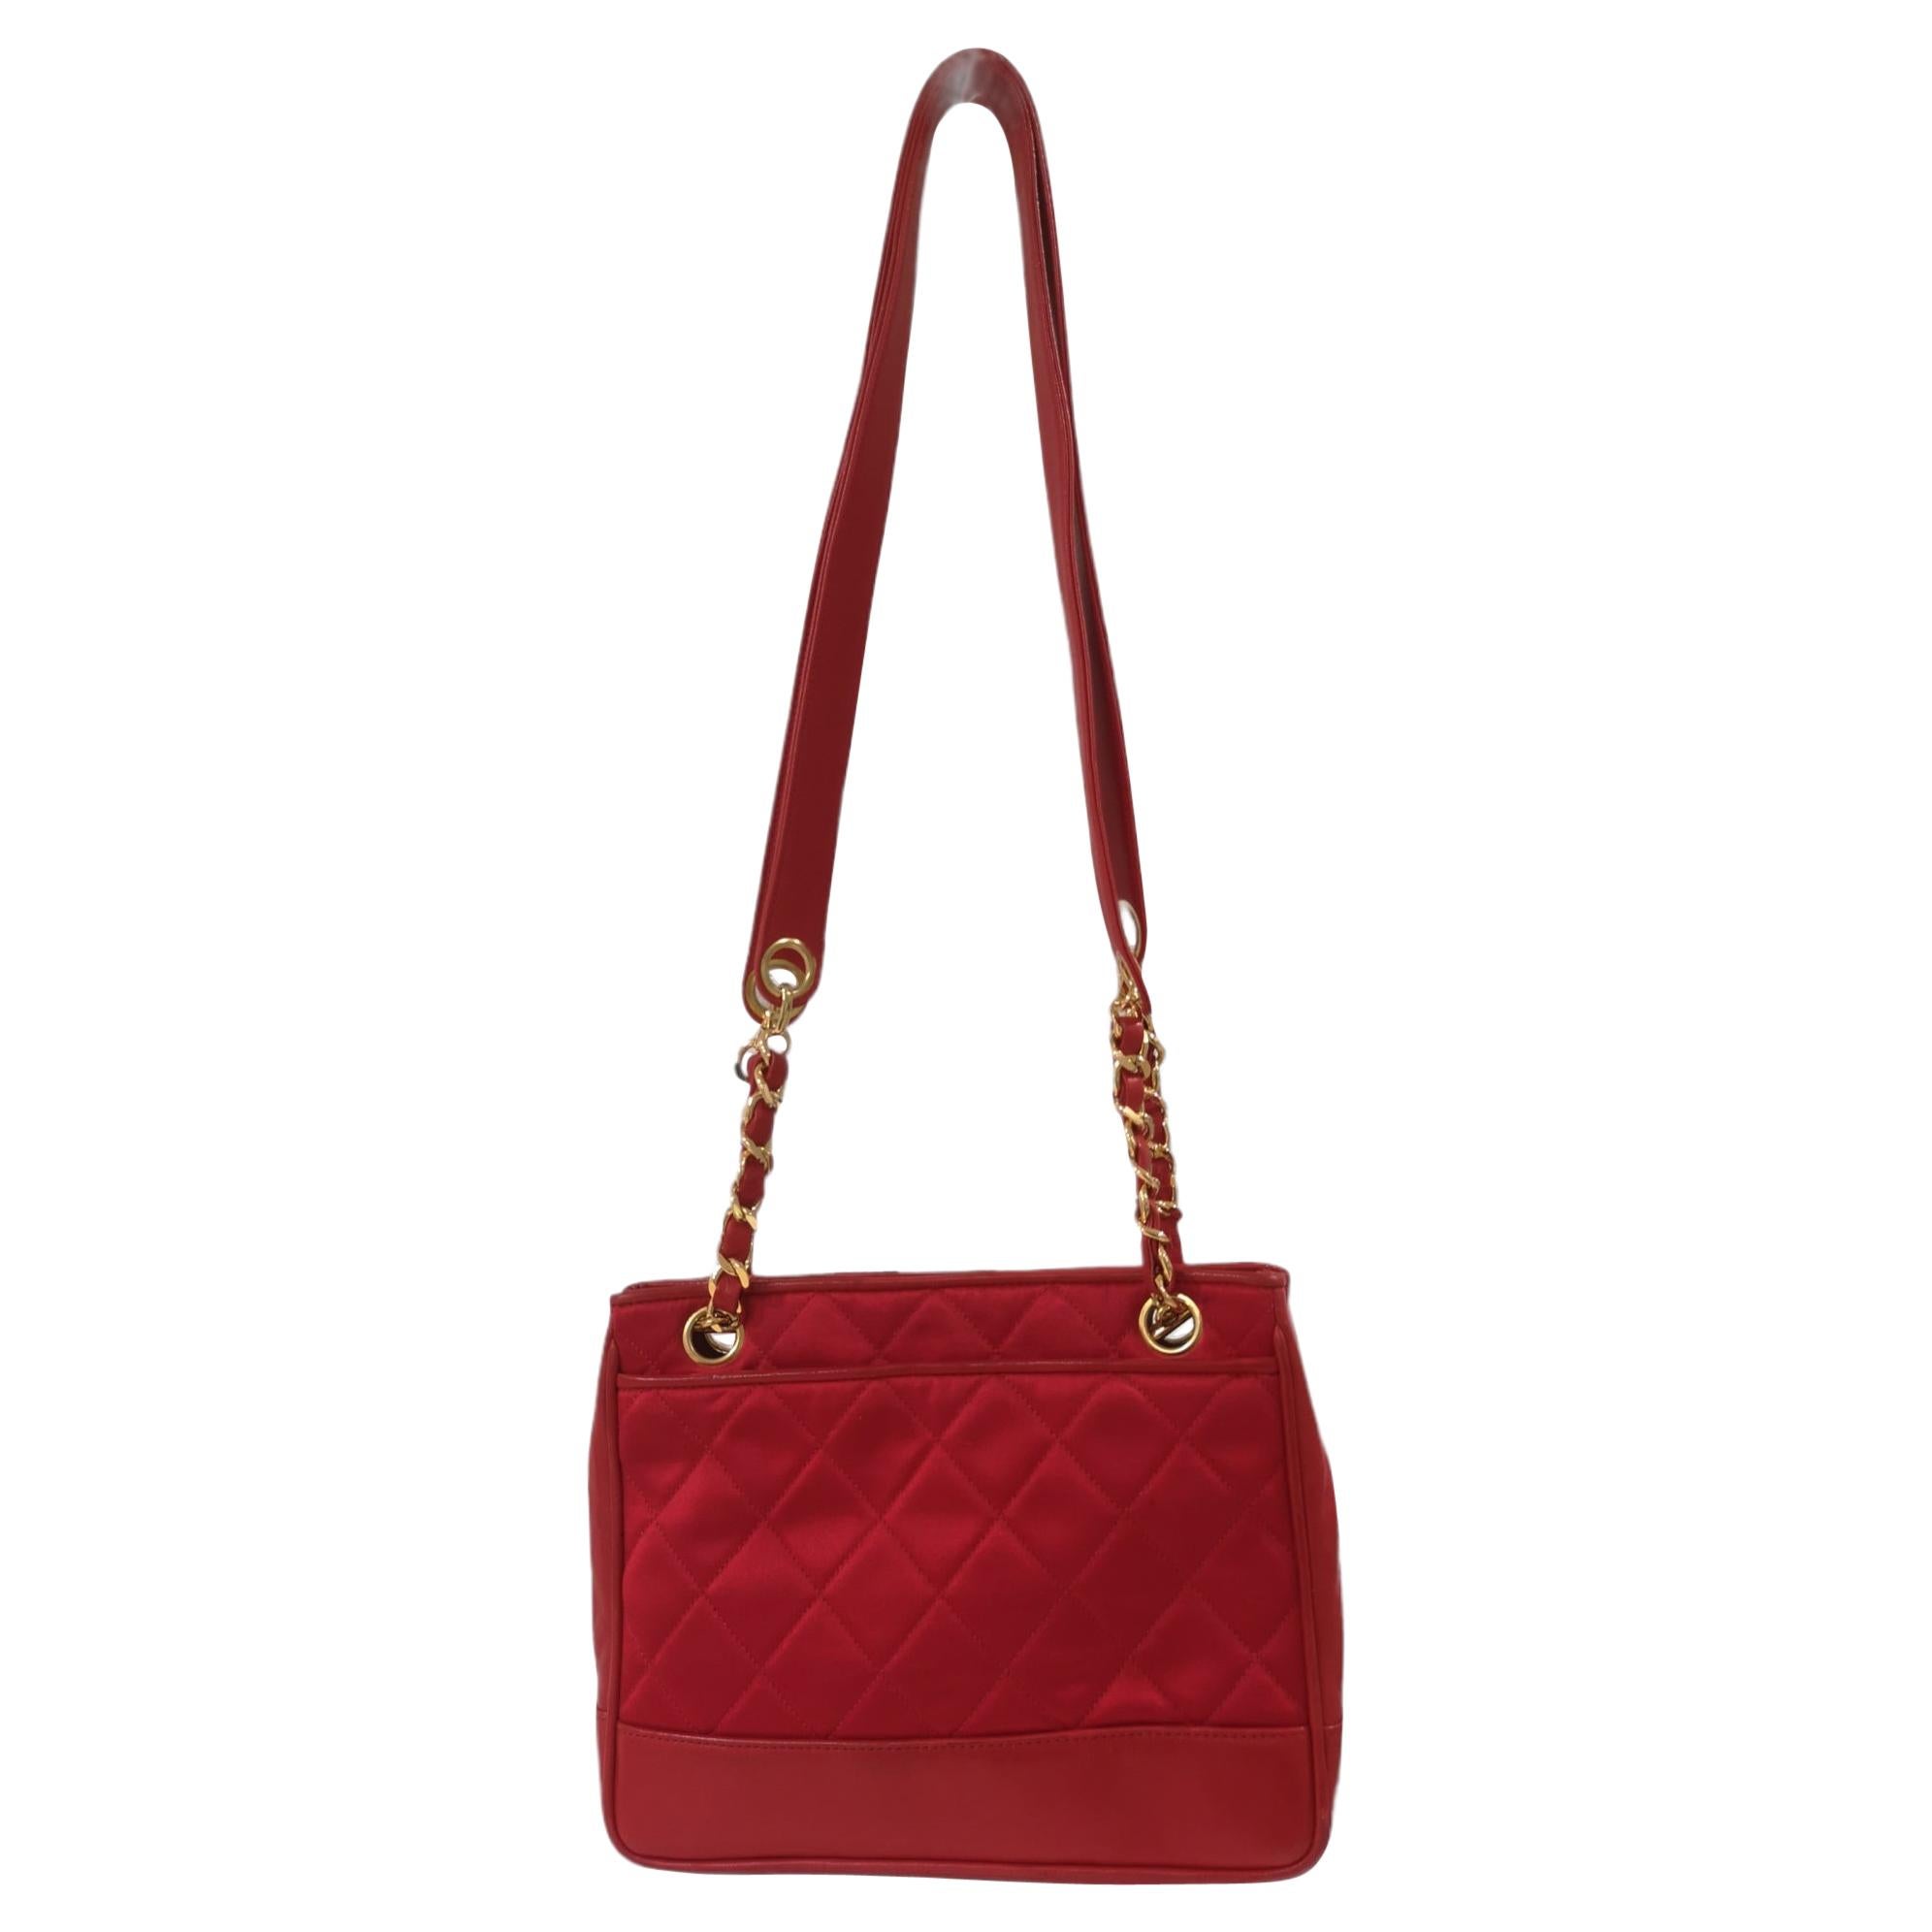 Chanel red leather and fabric shoulder bag